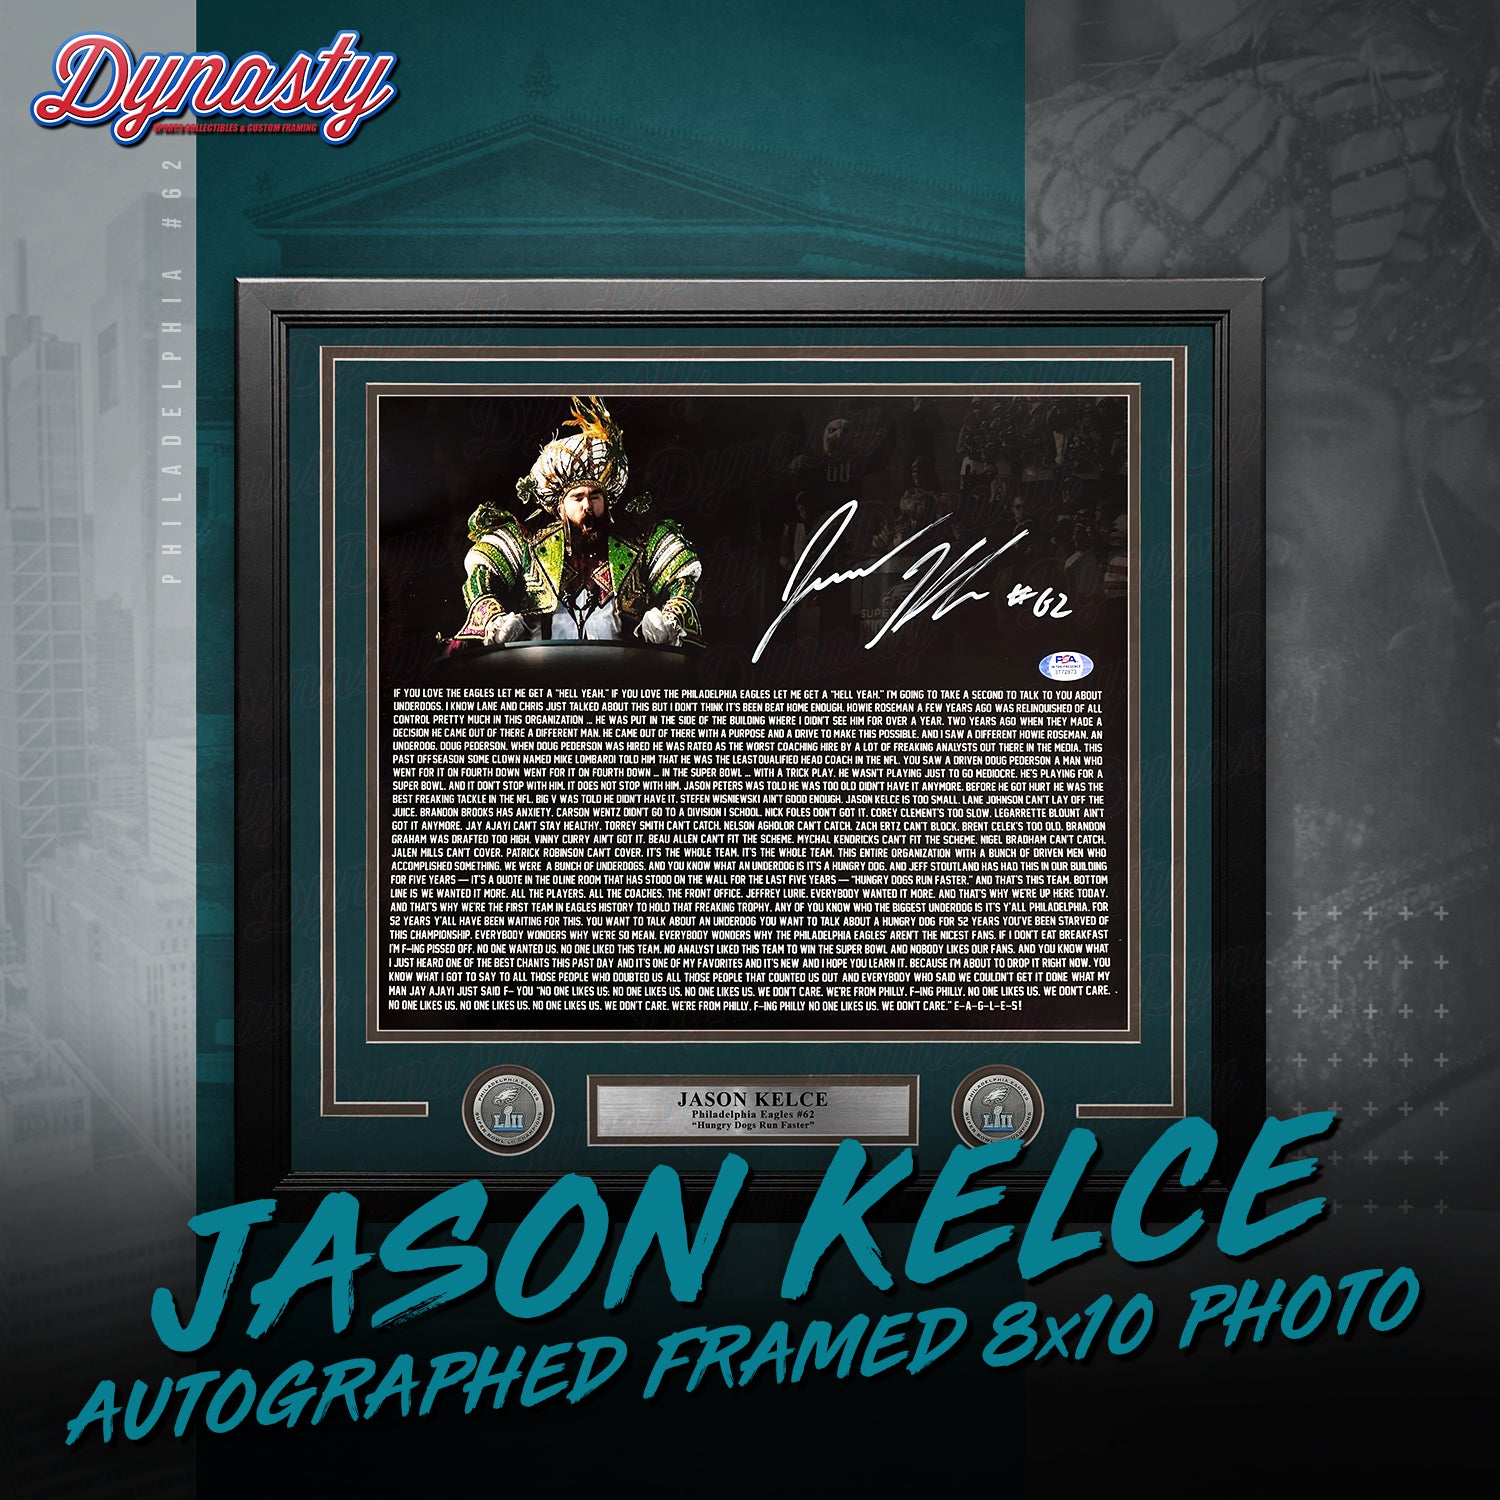 Jason Kelce Autographed Parade Speech Text Framed Photo | Pre-Sale Opportunity - Dynasty Sports & Framing 